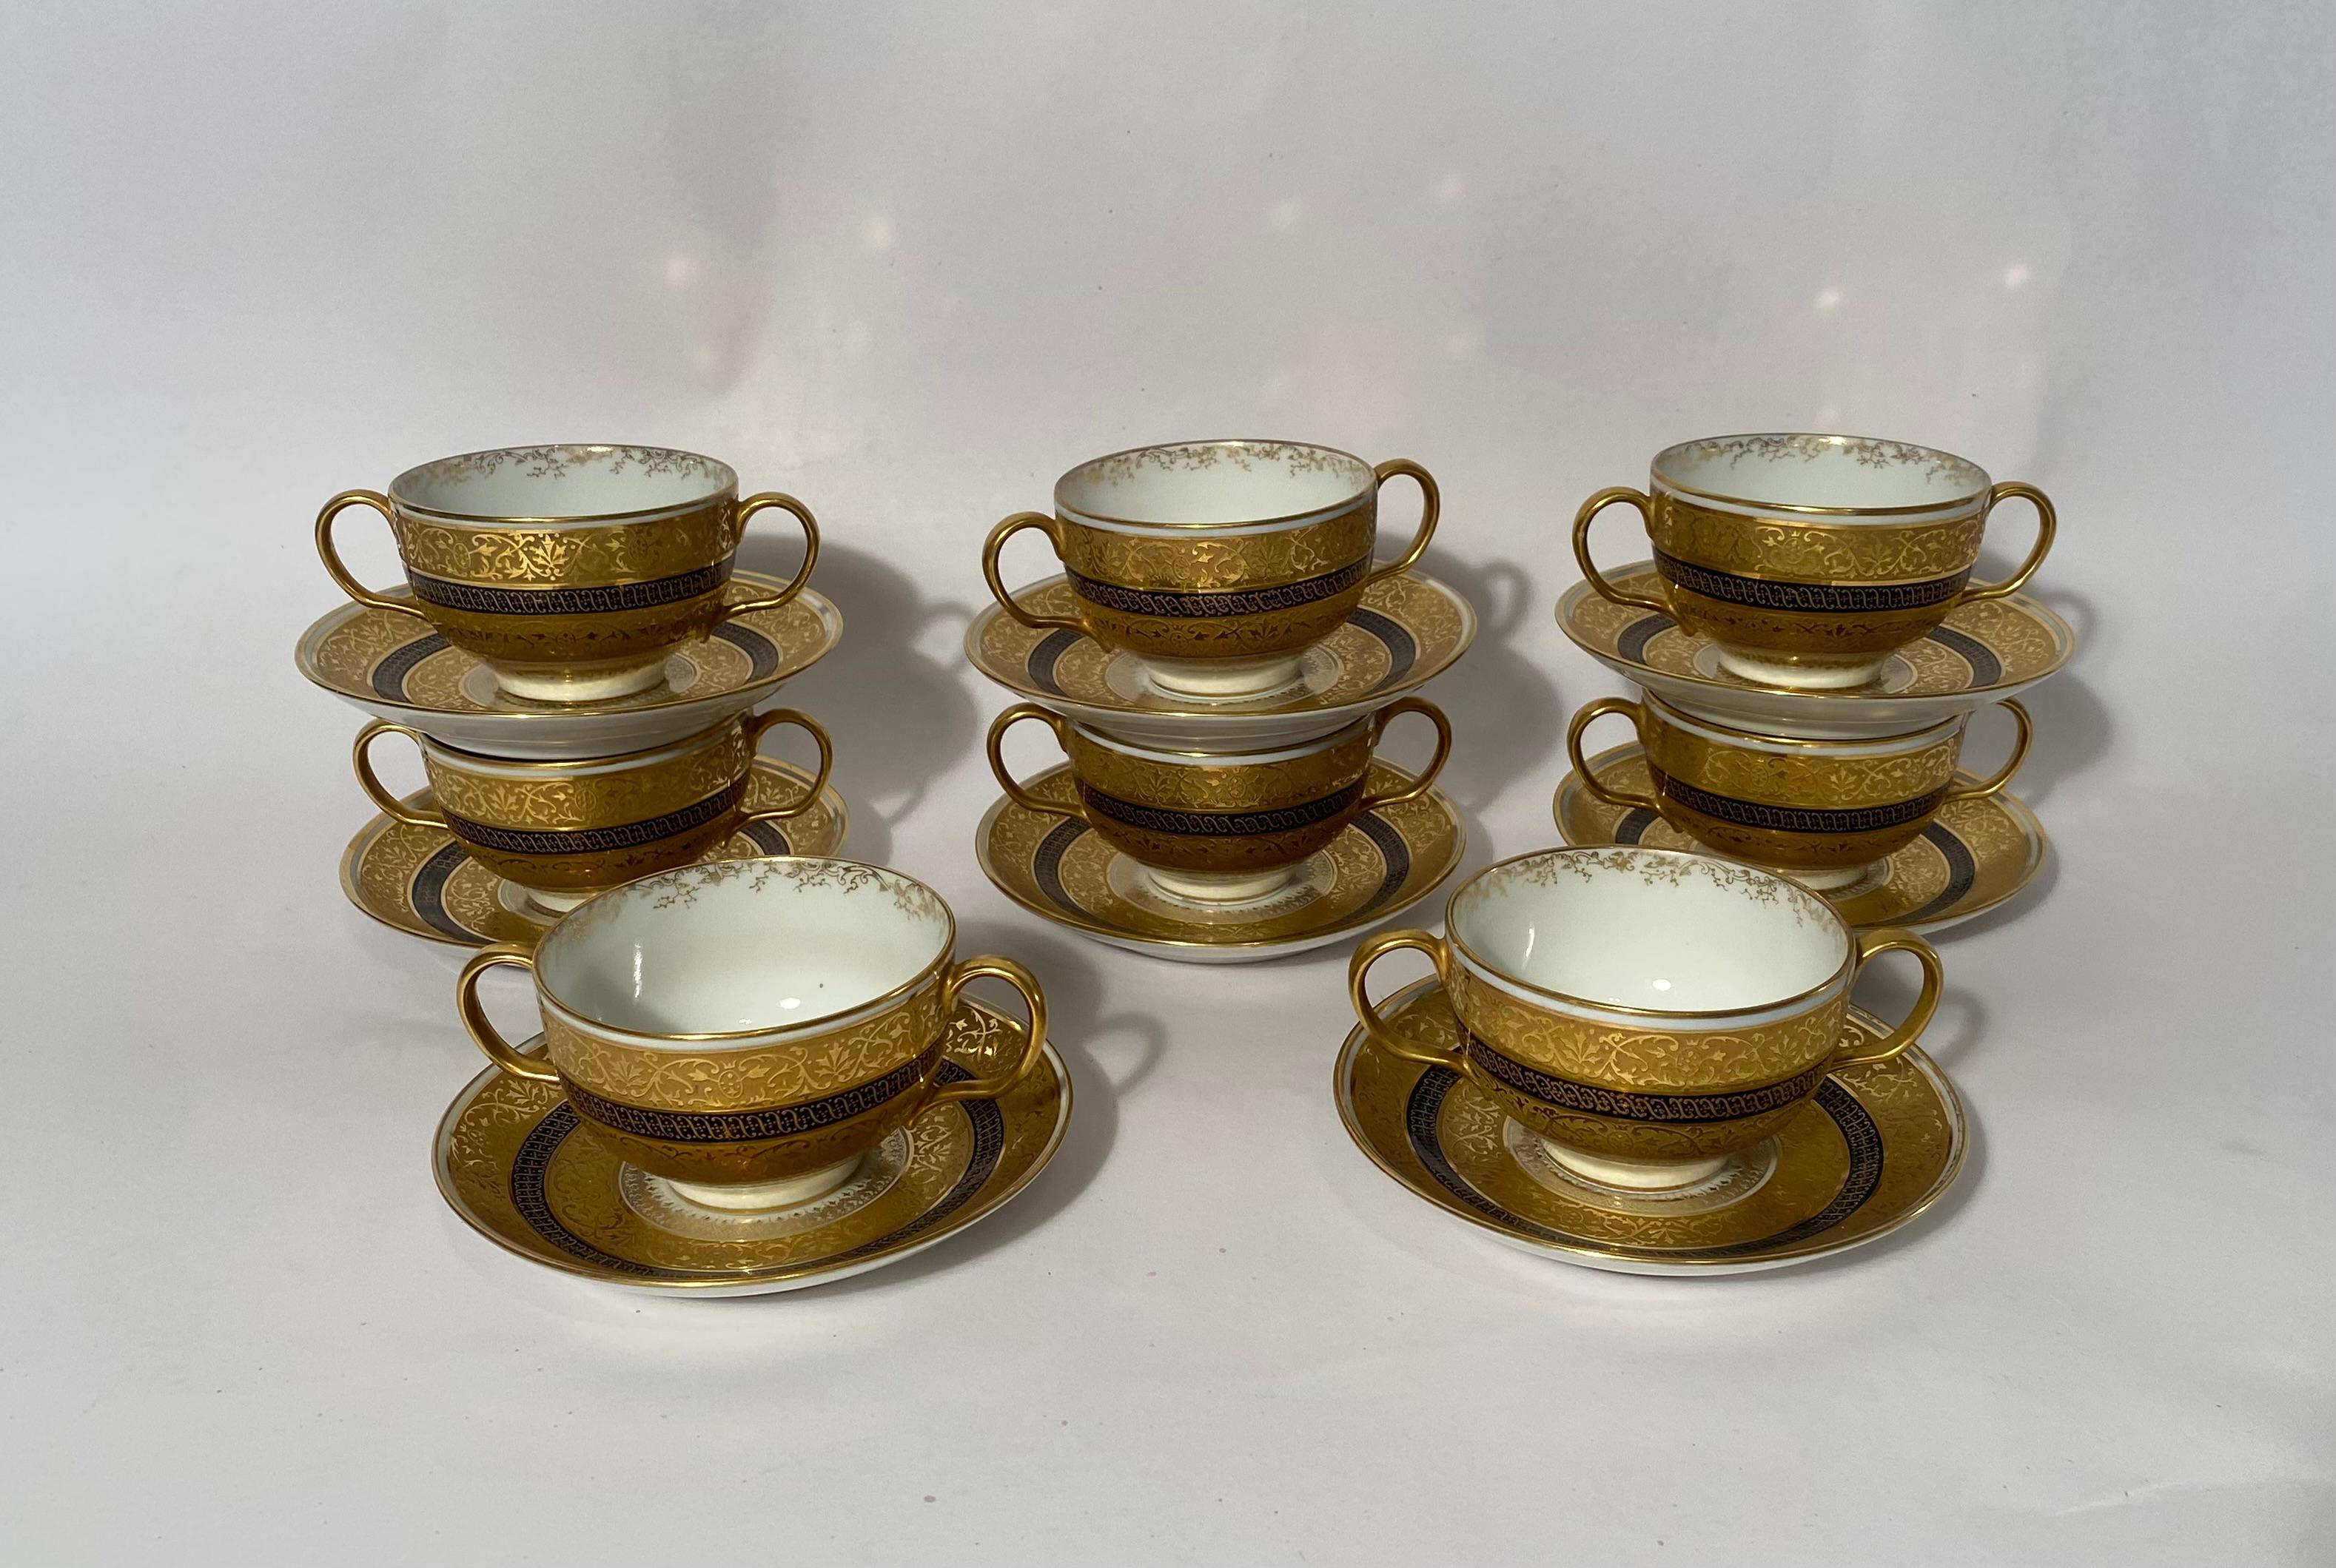 French A Set of 8 Cream Soup or Dessert Cups & Saucers. Antique Limoges Circa 1890 